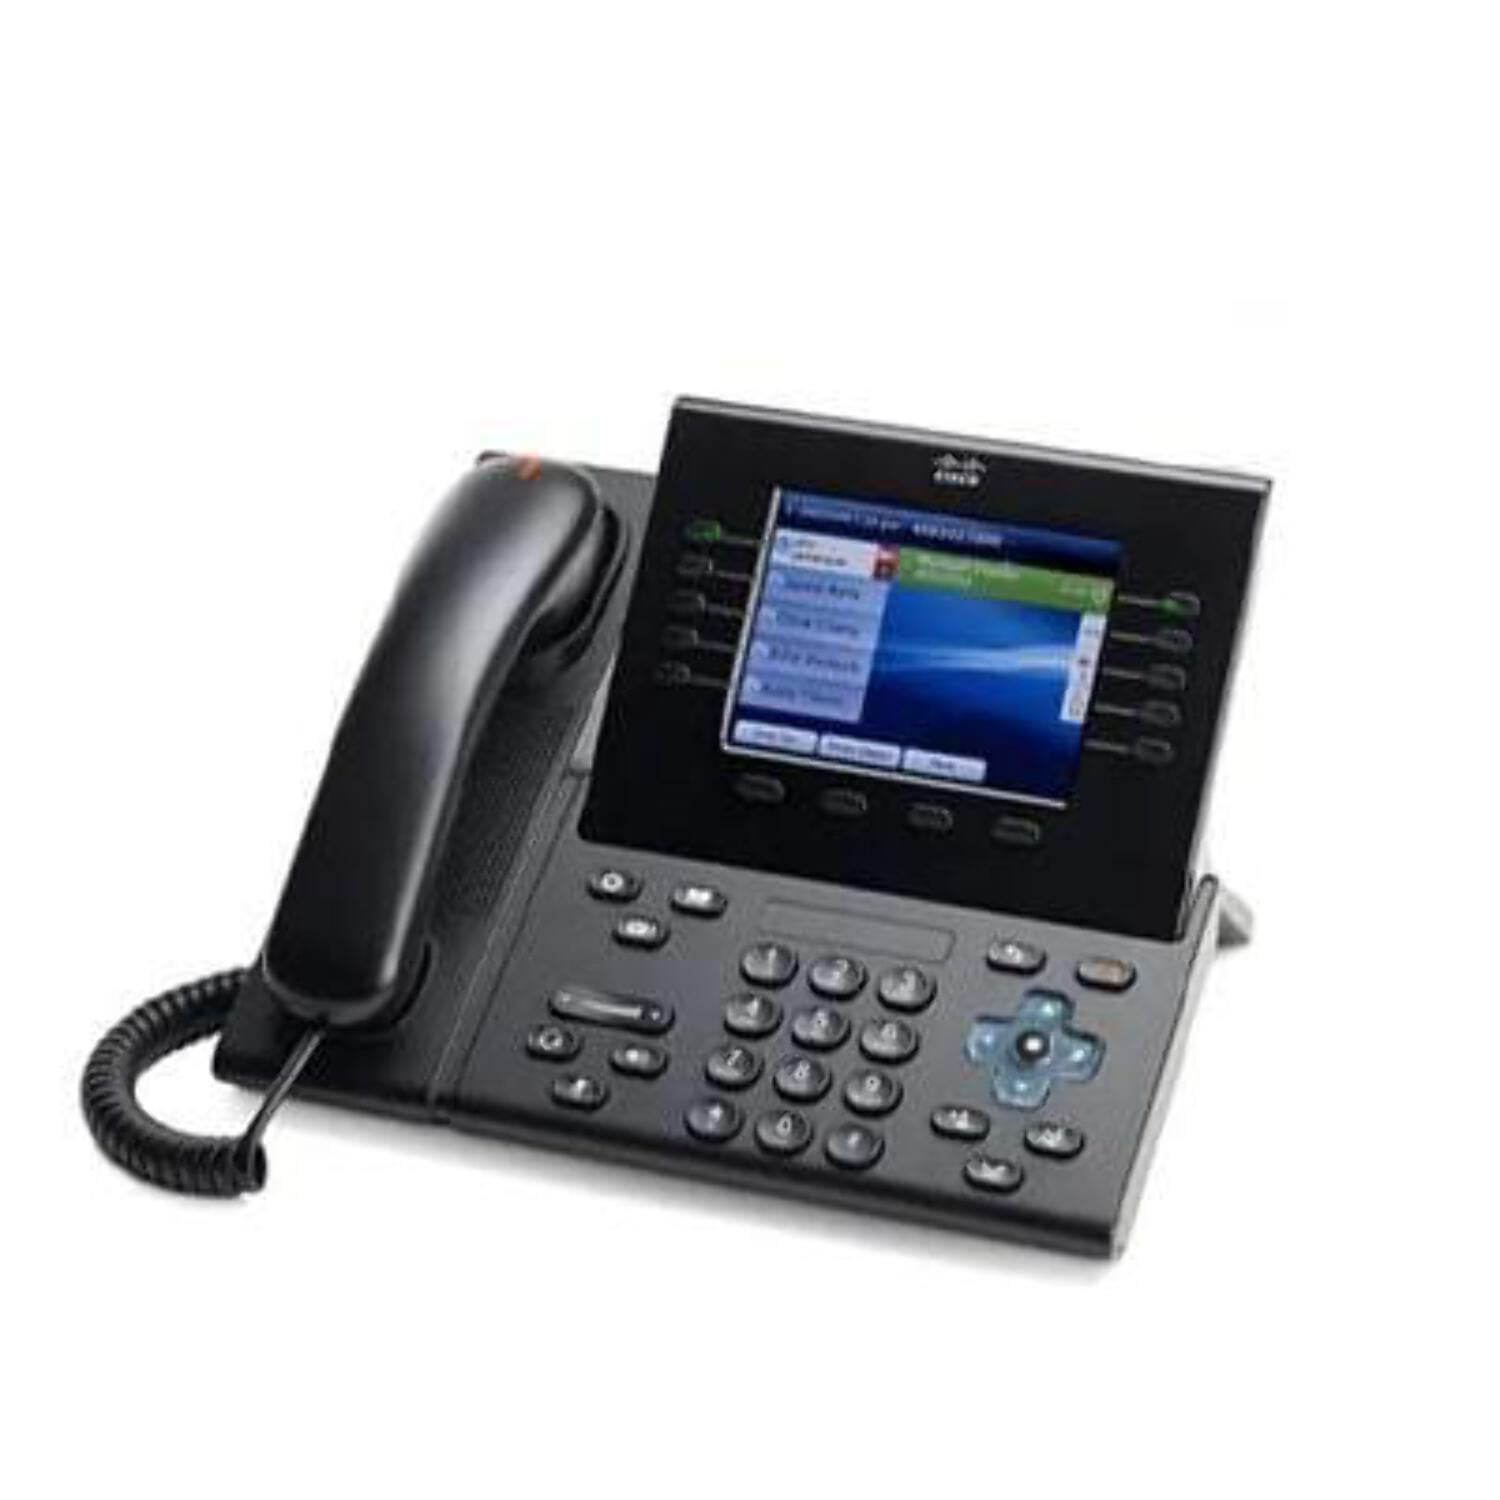 Cisco CP-7975G Unified IP Phone VoIP Telephone Open Box 